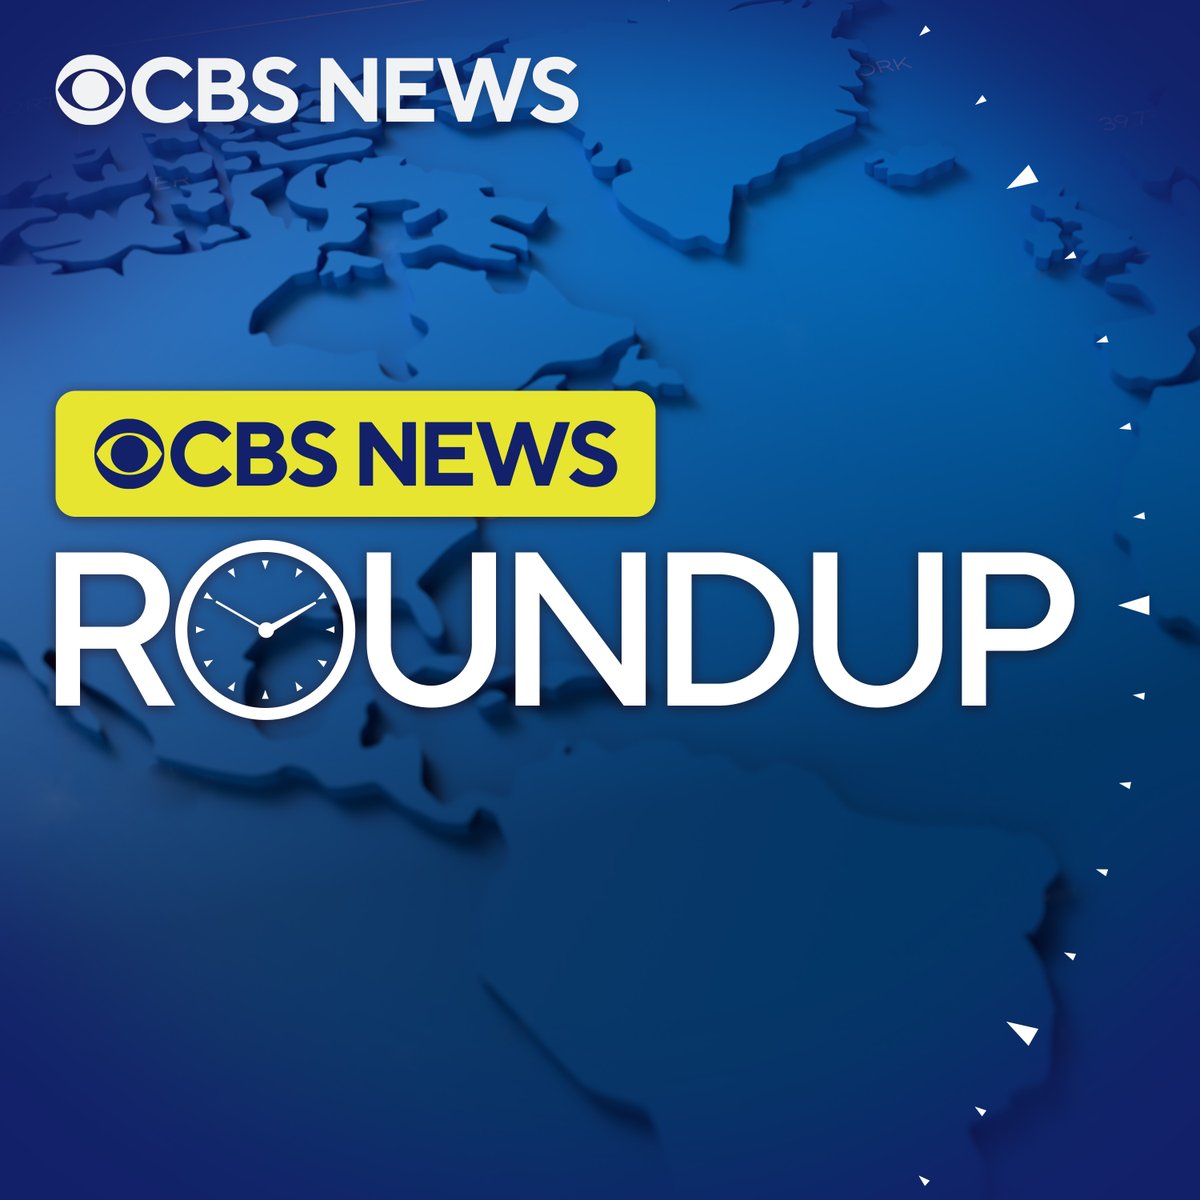 On the @CBSNews Weekend Roundup with @allisonradio: ▪️ U.S. gun violence (Linda Kenyon) ▪️ Arizona abortion @JanetShamlian ▪️ Ret. Lt. Charles Wilson @4Nableo discusses the @Chicago_Police fatal shooting with 96 shots fired ...and more. Listen: link.chtbl.com/cbs-news-round…